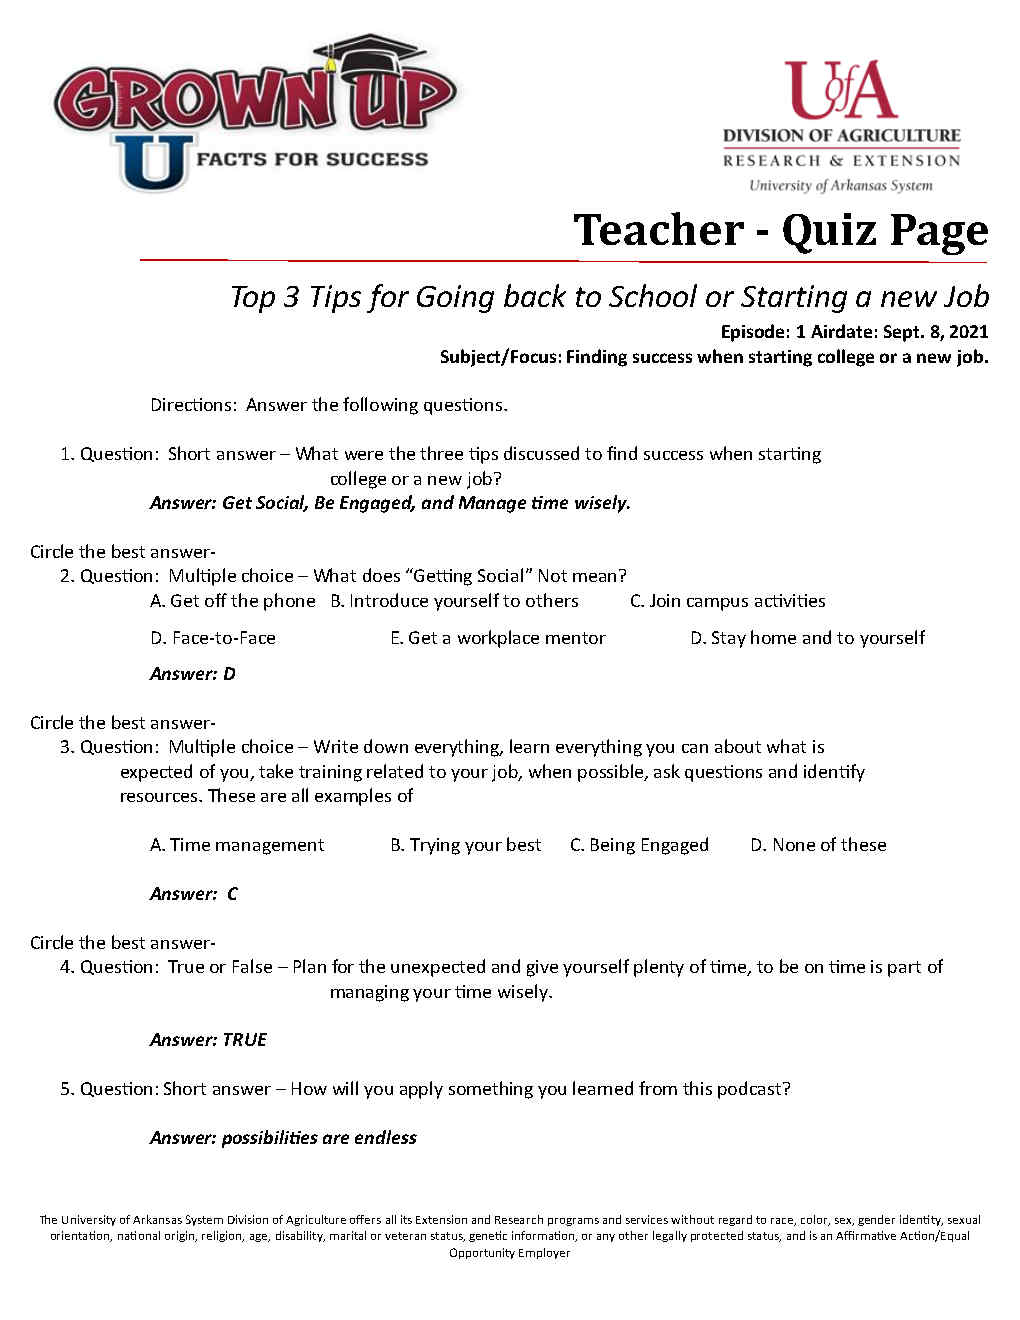 Sample picture of the teacher version of the Grown Up U podcast student quizzes available through your local county extension agent.